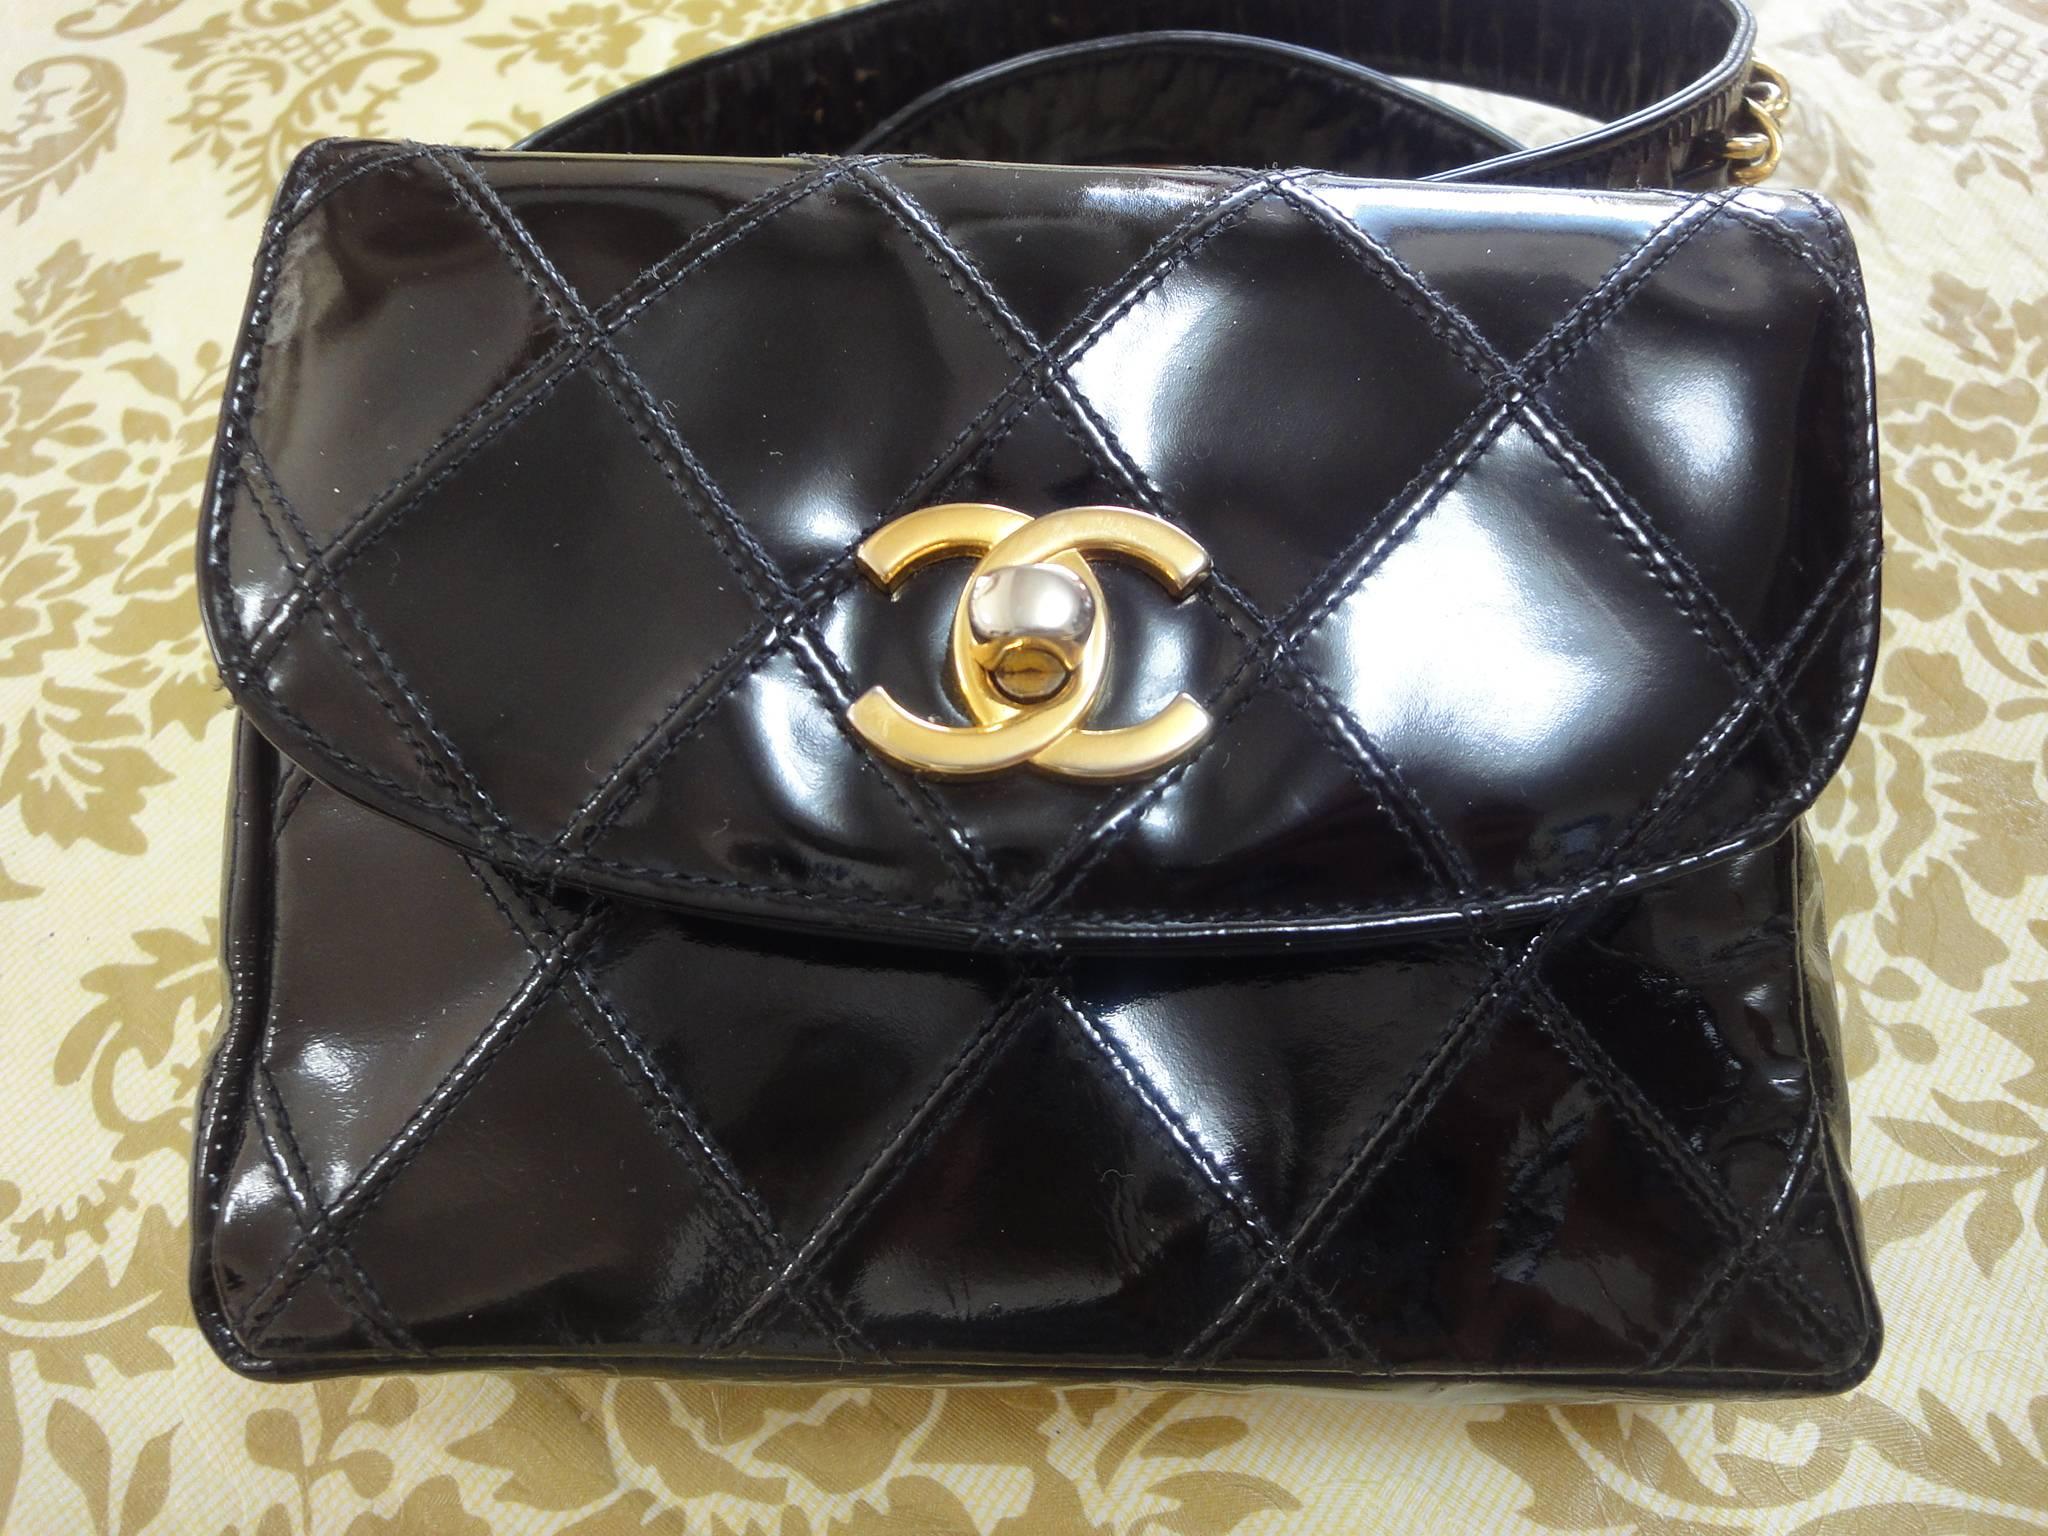 1990s. Vintage CHANEL black patent enamel leather waist purse, fanny pack with golden chain belt and CC closure hock. 31